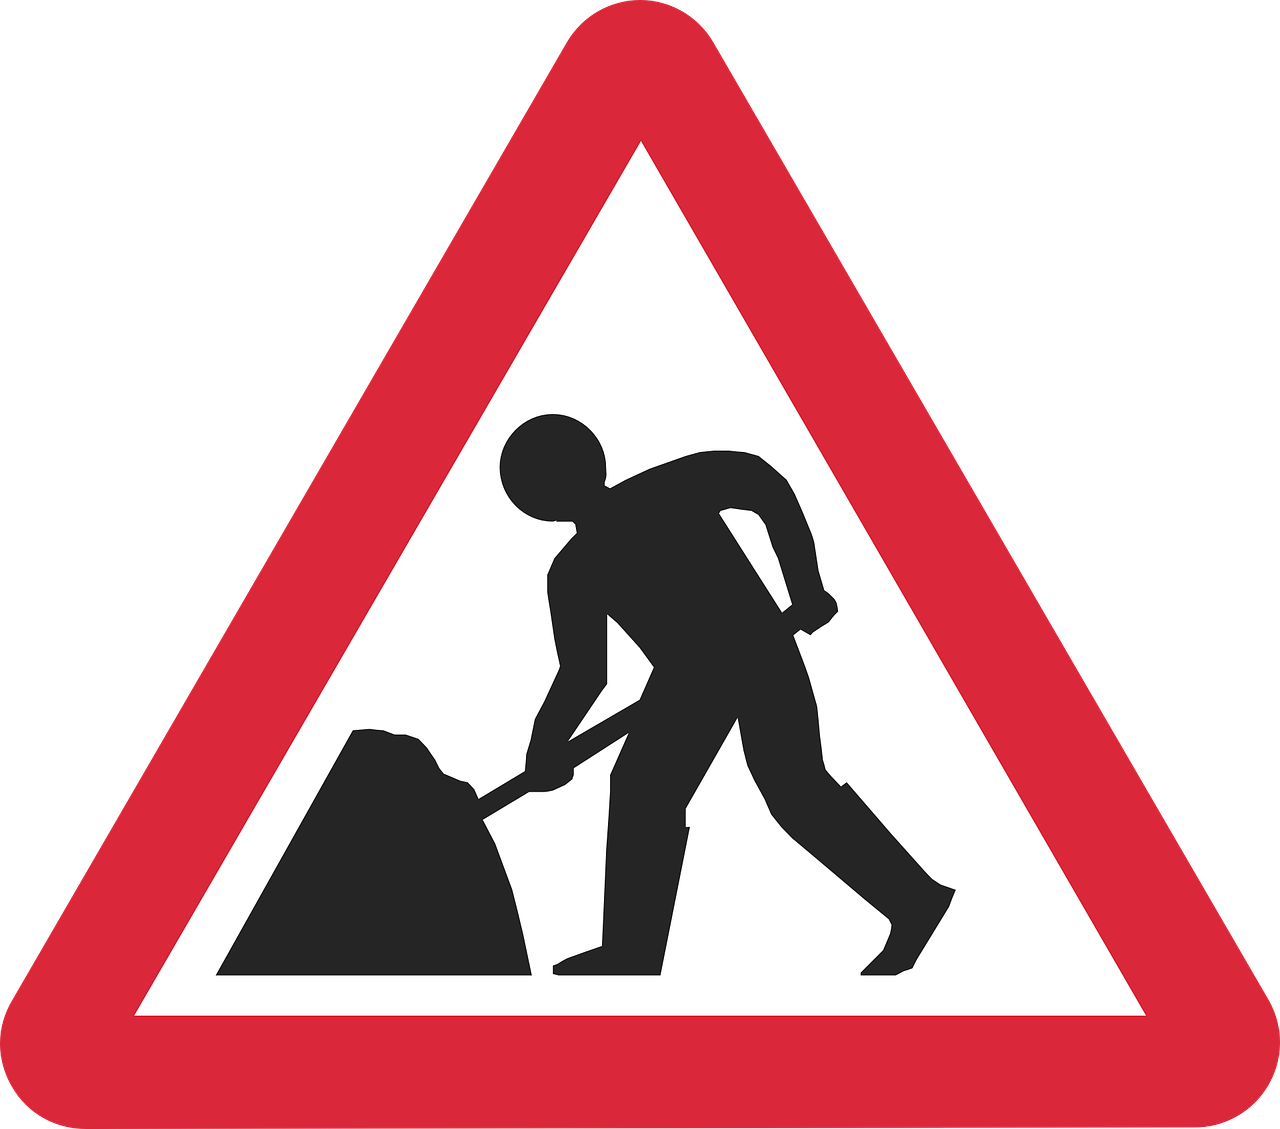 Roadworks warning triangle showing outline of a man digging